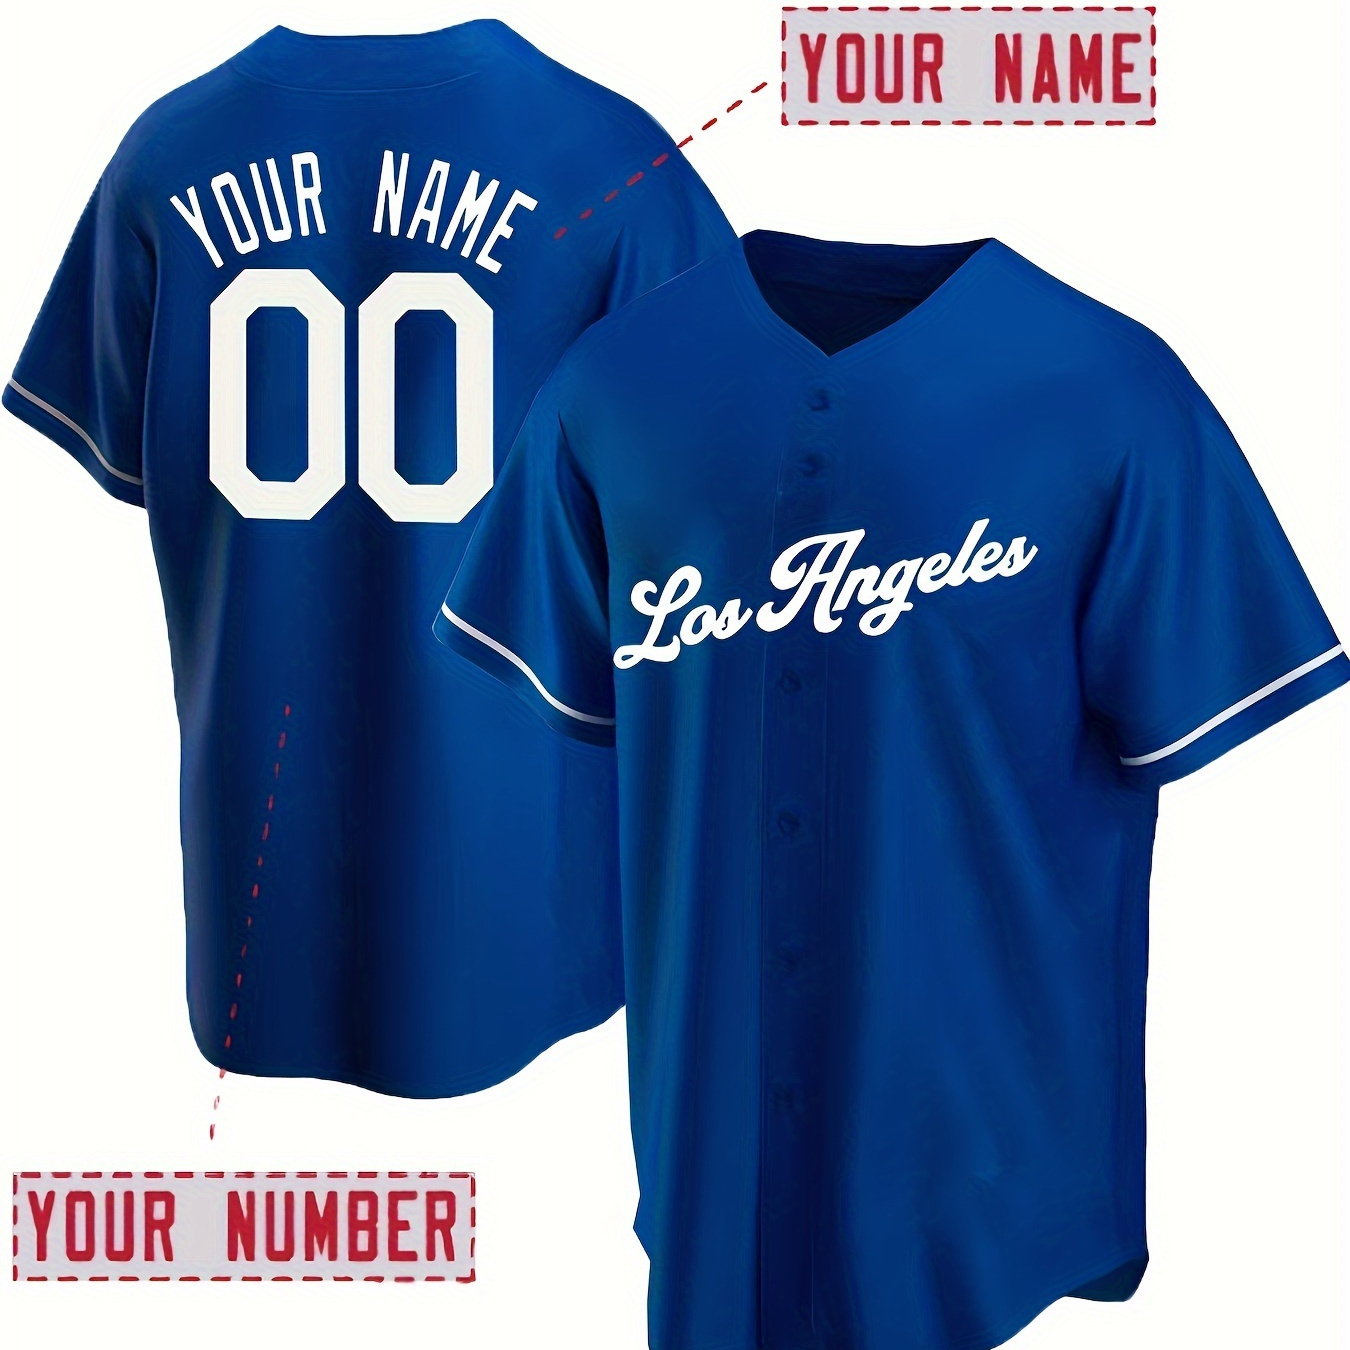 

Men's Los Angeles V-neck Baseball Jersey With Customized Name And Number, Comfy Top For Summer Sport